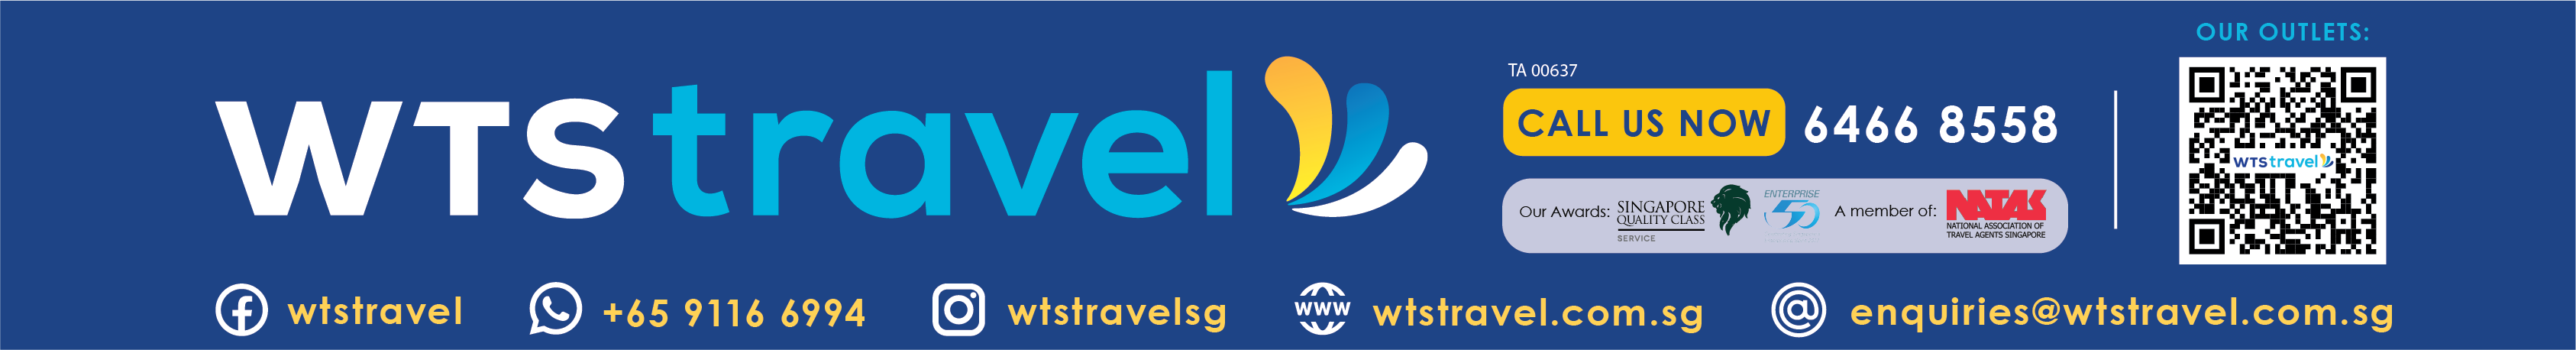 Banner of WTS Travel Outlets Locations